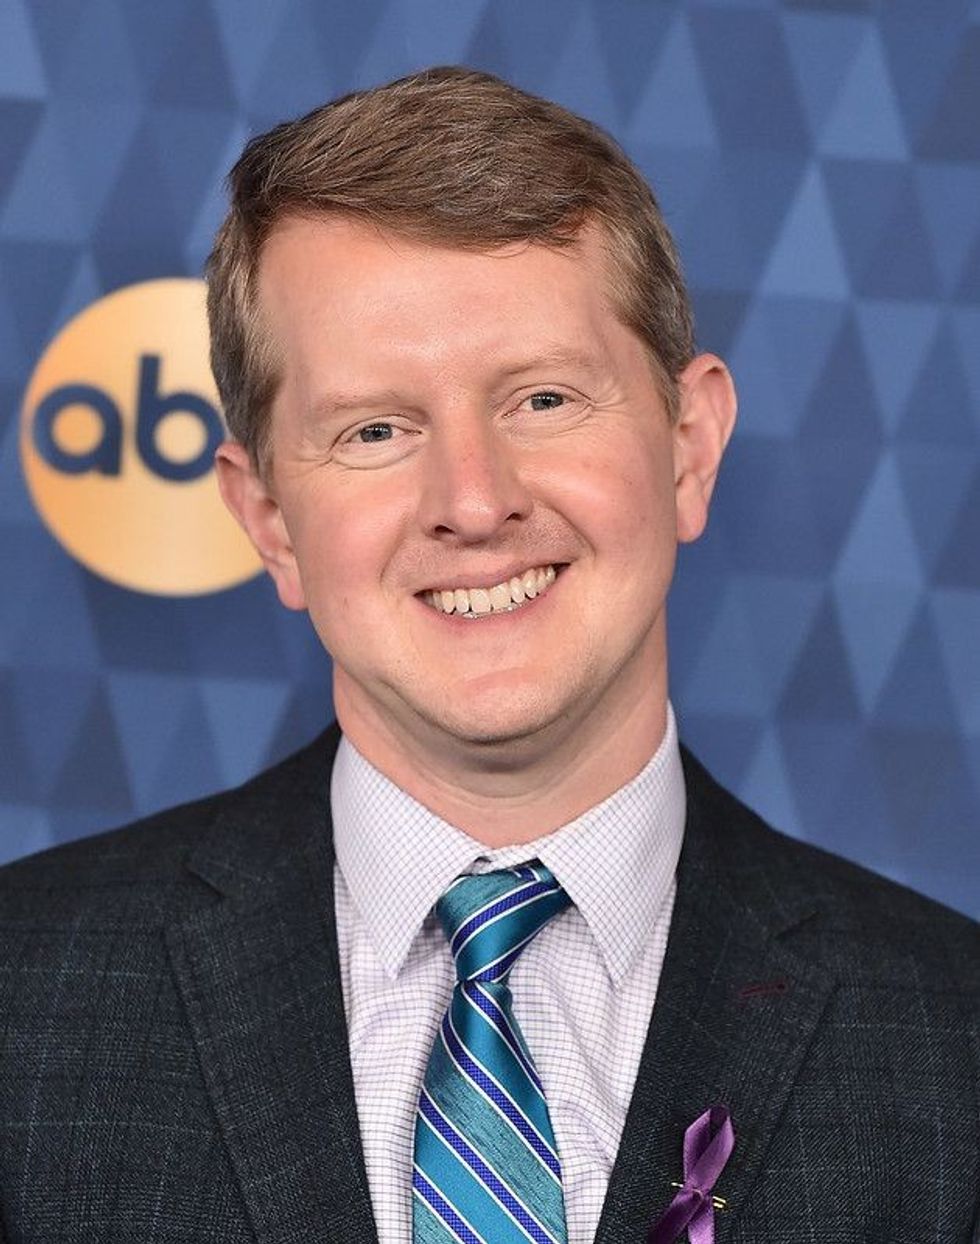 Find out about the other fascinating facts and trivia about Ken Jennings, his childhood, education, and professional life.